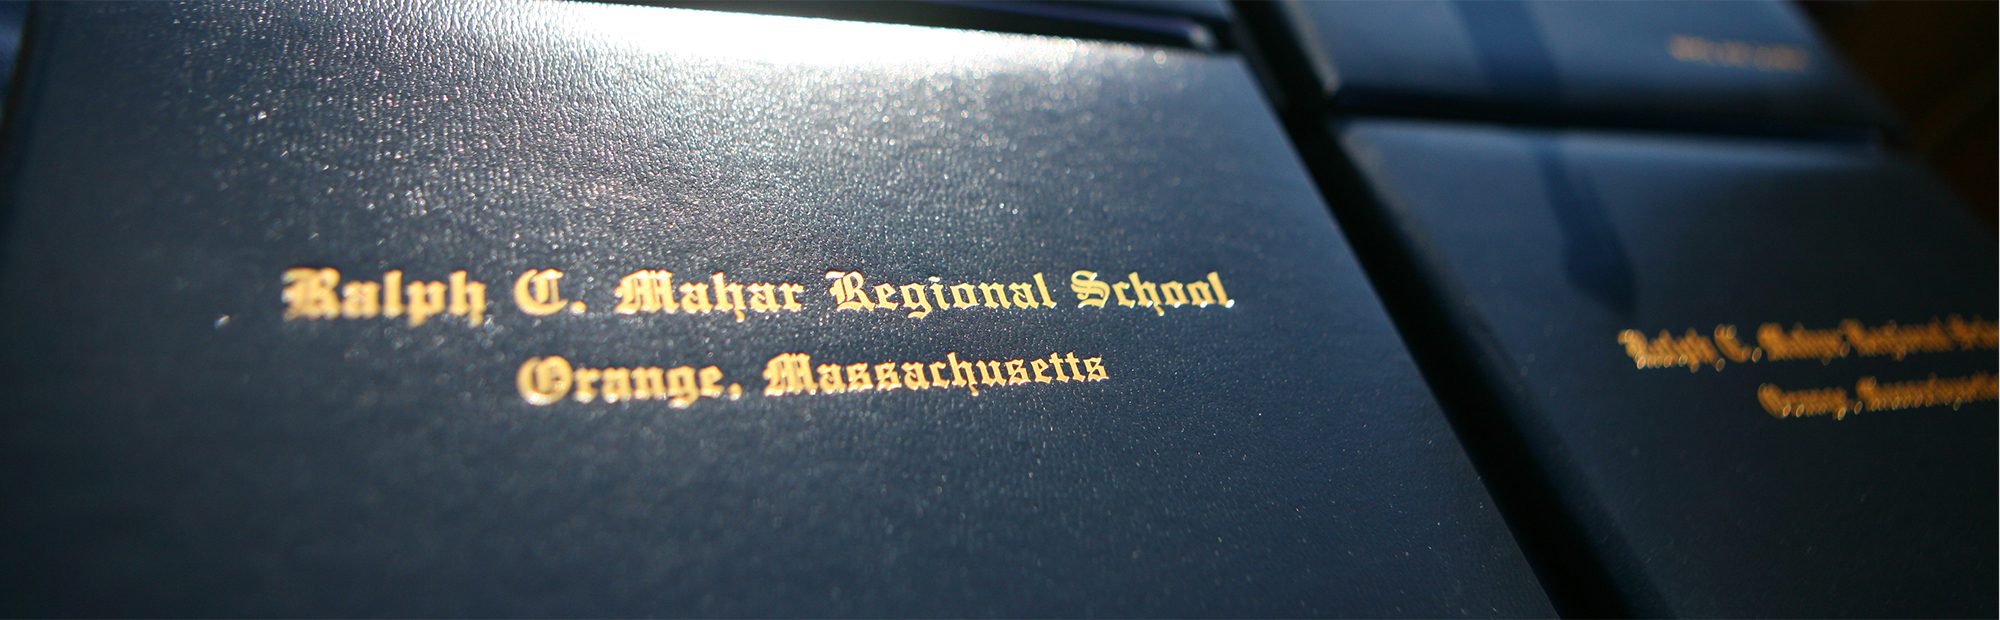 Close up of diplomas side-by-side on a table